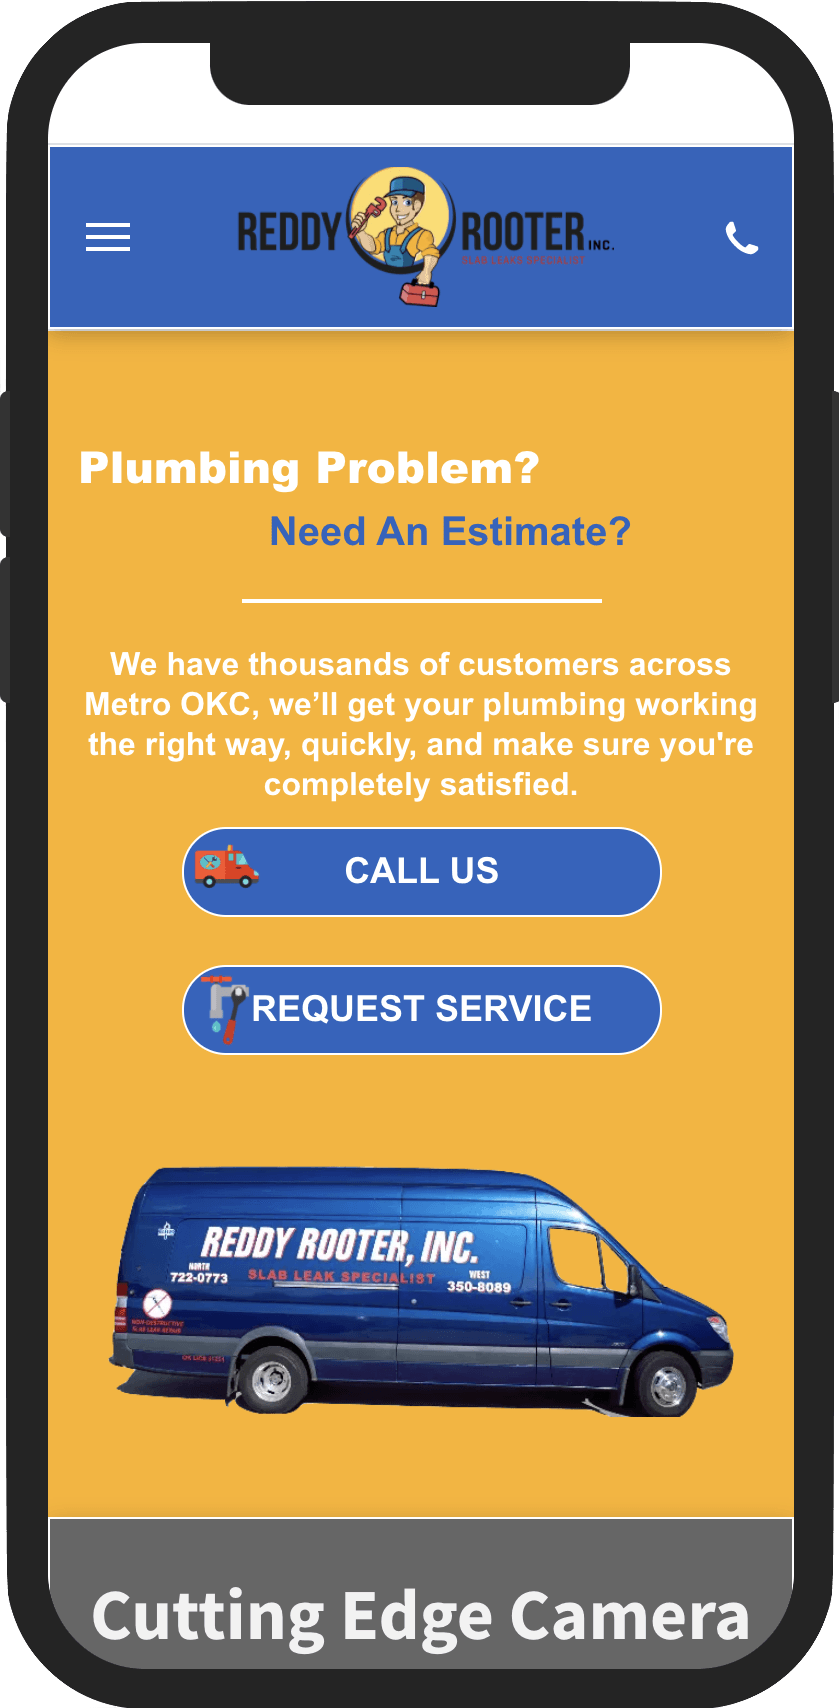 A phone screen shows a plumbing problem and a van.